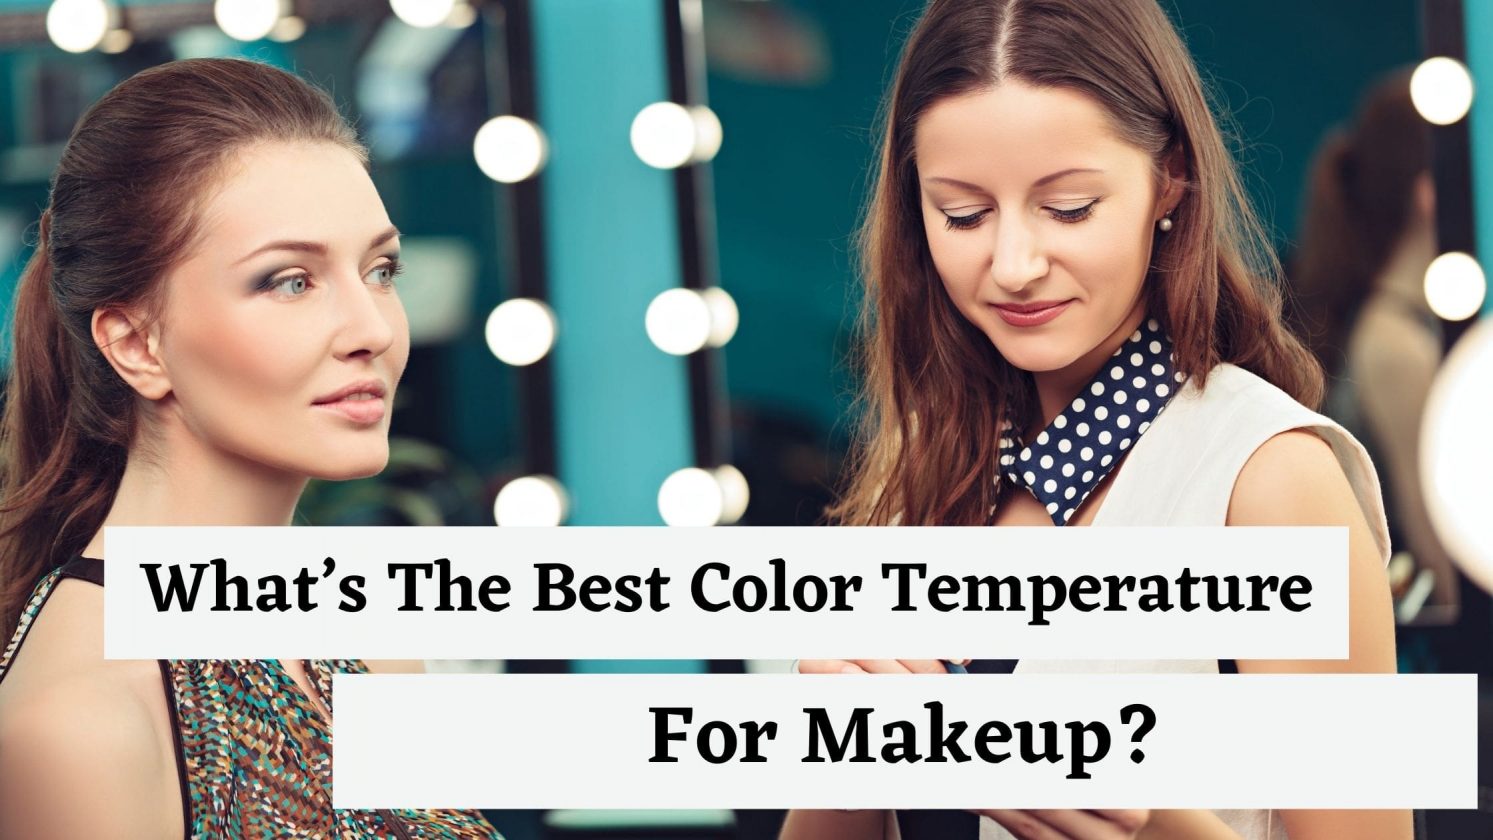 What’s The Best Color Temperature For Makeup?